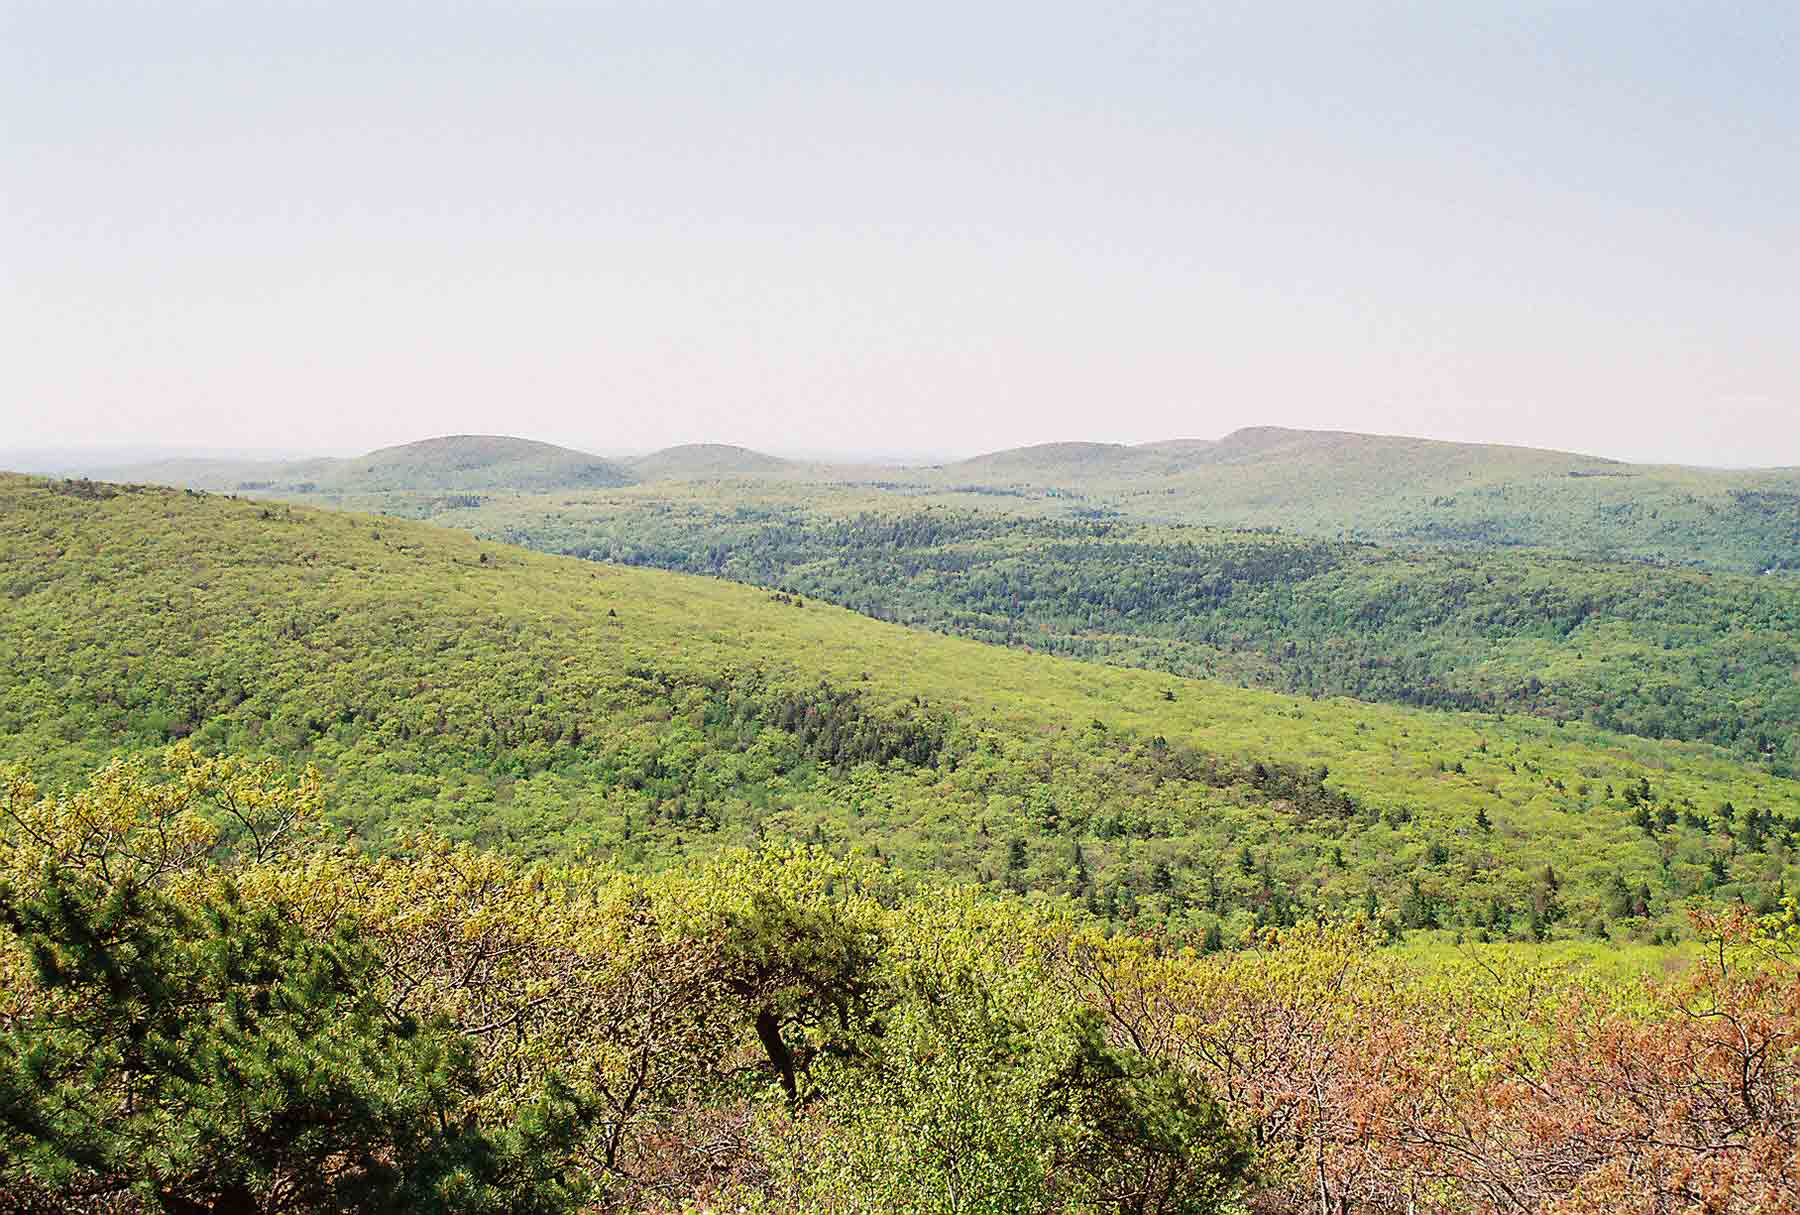 View of the Riga Plateau in the Tri-state region of CT, MA, and NY taken from the south side of Mt. Everett. This plateau is about a thousand feet above the Housatonic Valley to the east. A shoulder of Race Mt. is in the foreground. Sages Ravine crosses the center of the picture. The  peak on the left in the distance is Bear Mt. in CT. Those on the right are Round Peak and Mt. Frisell with Brace Mt. behind them. All three of those summits are in New York. Taken at approximately mm 4.7.  Courtesy dlcul@conncoll.edu